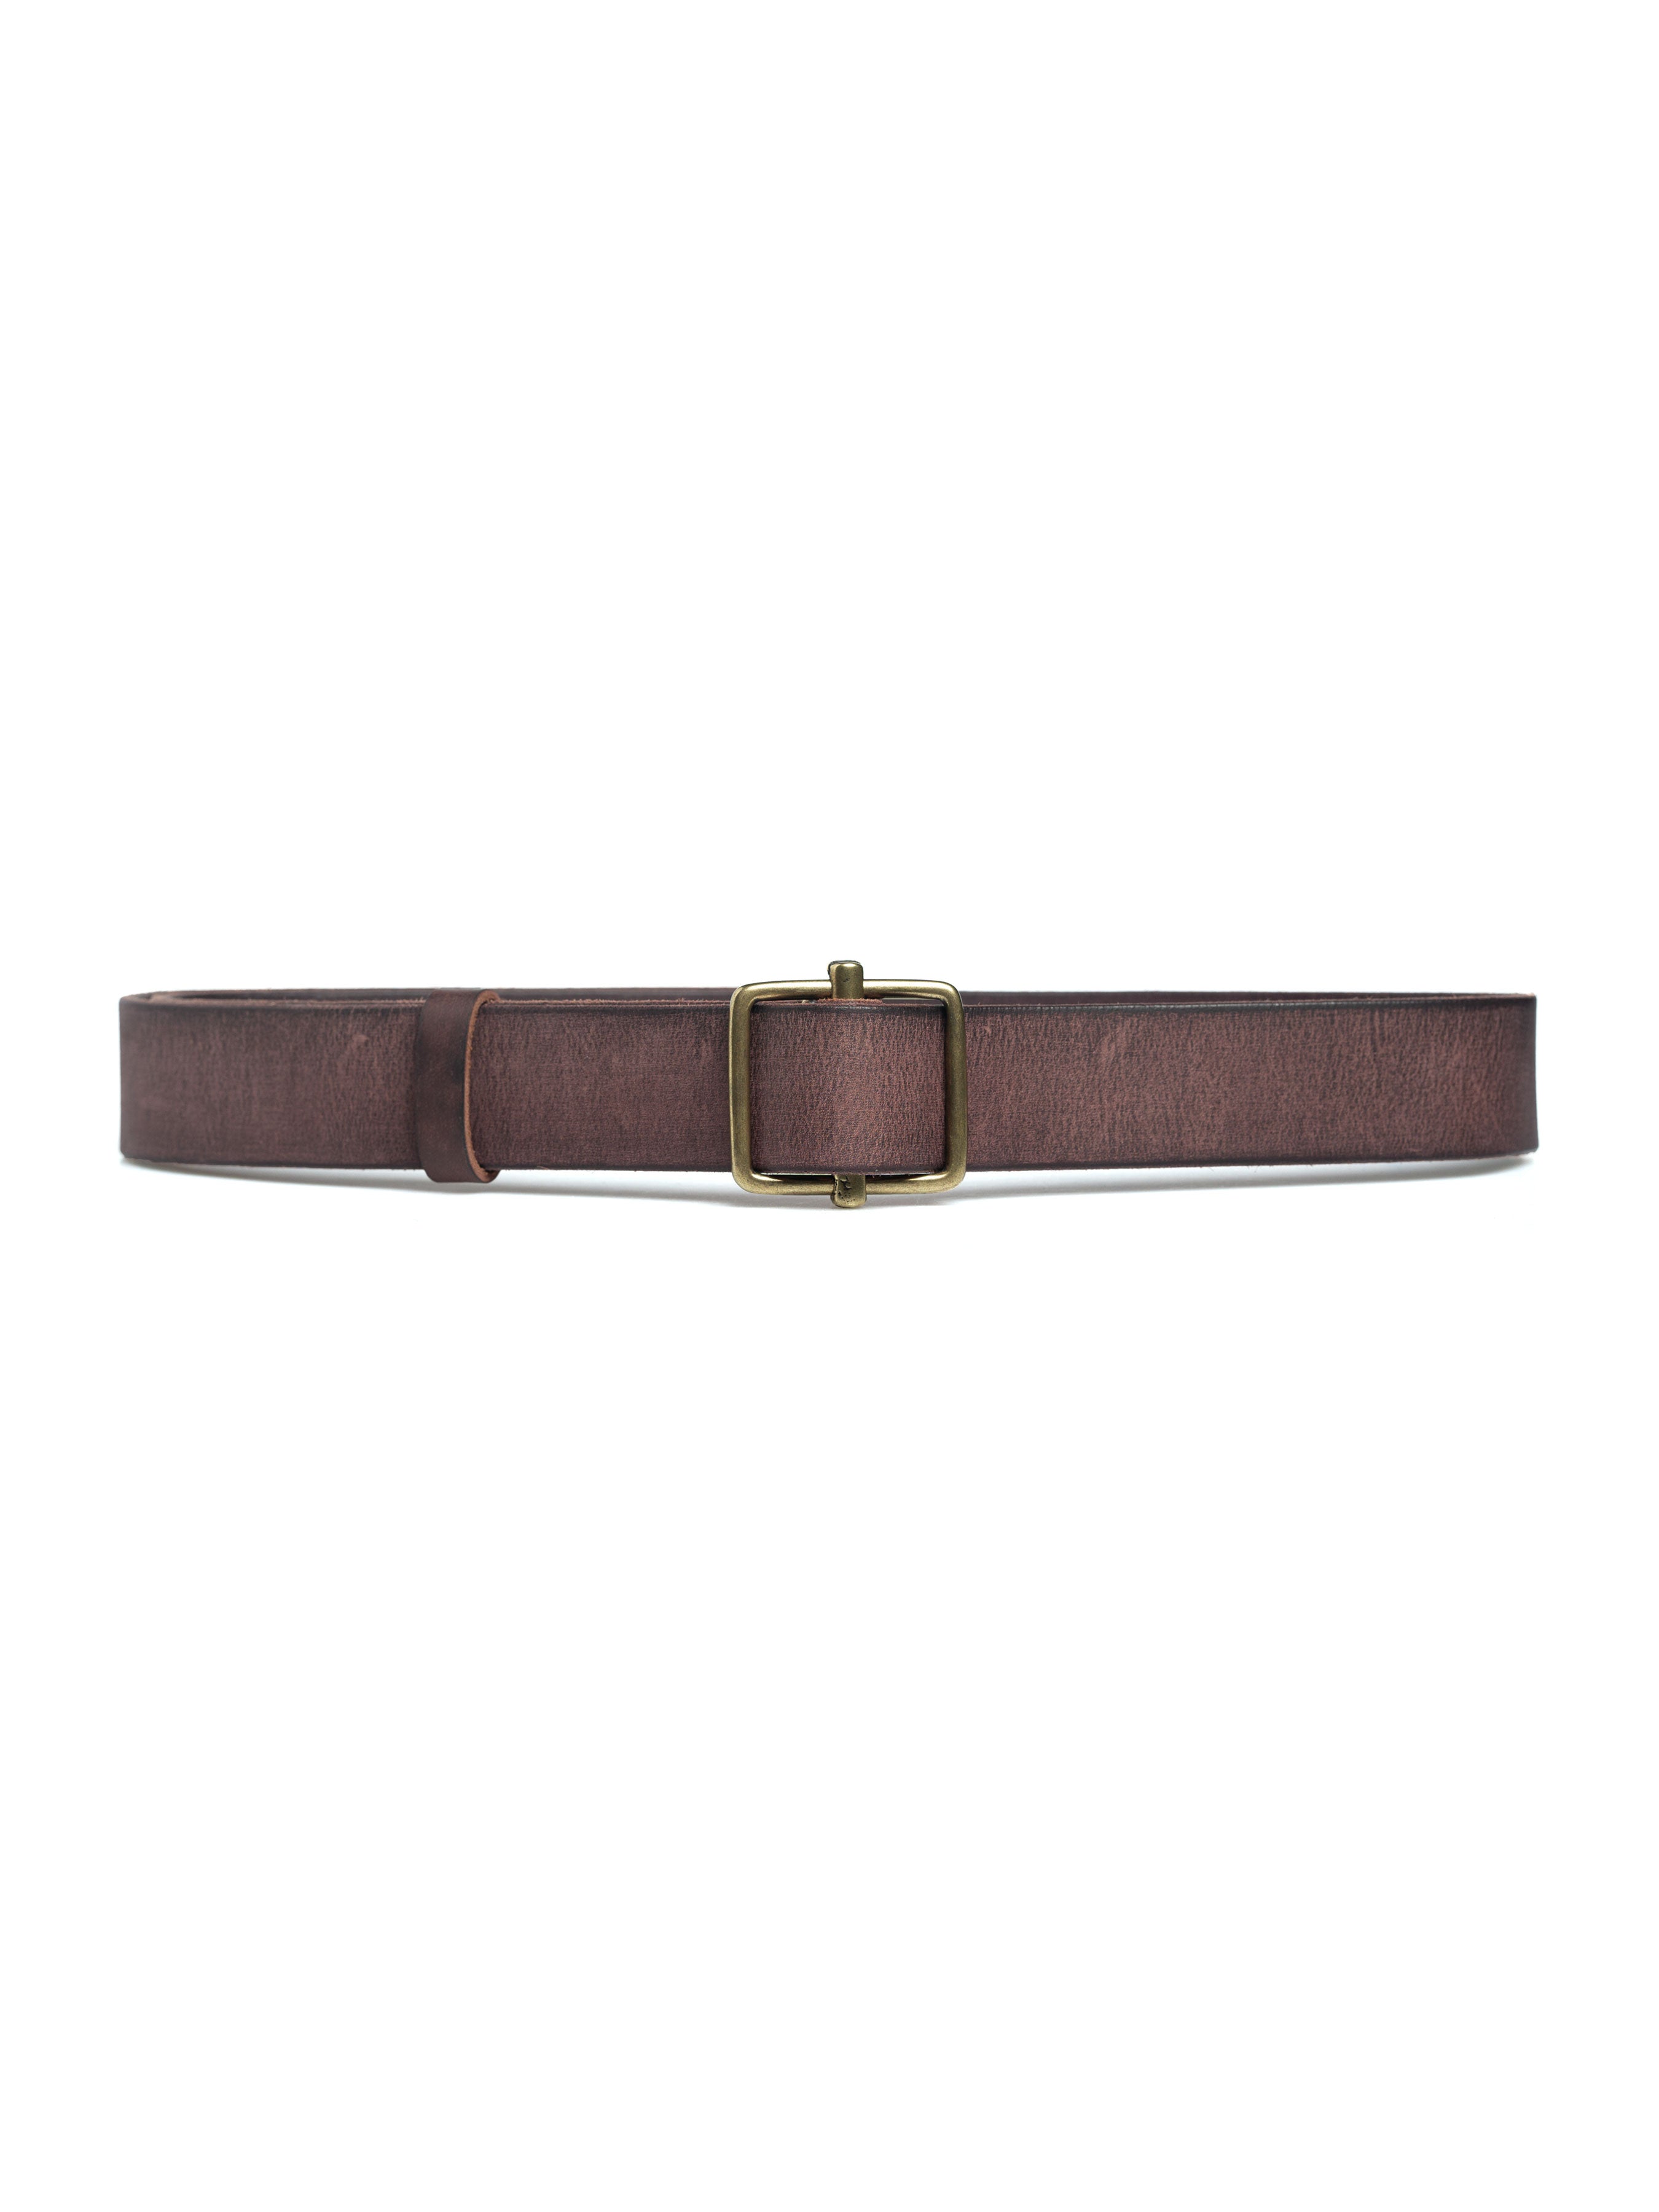 Italian Rustic Leather Belt with Adjuster Gold-toned Buckle - Zeve Shoes